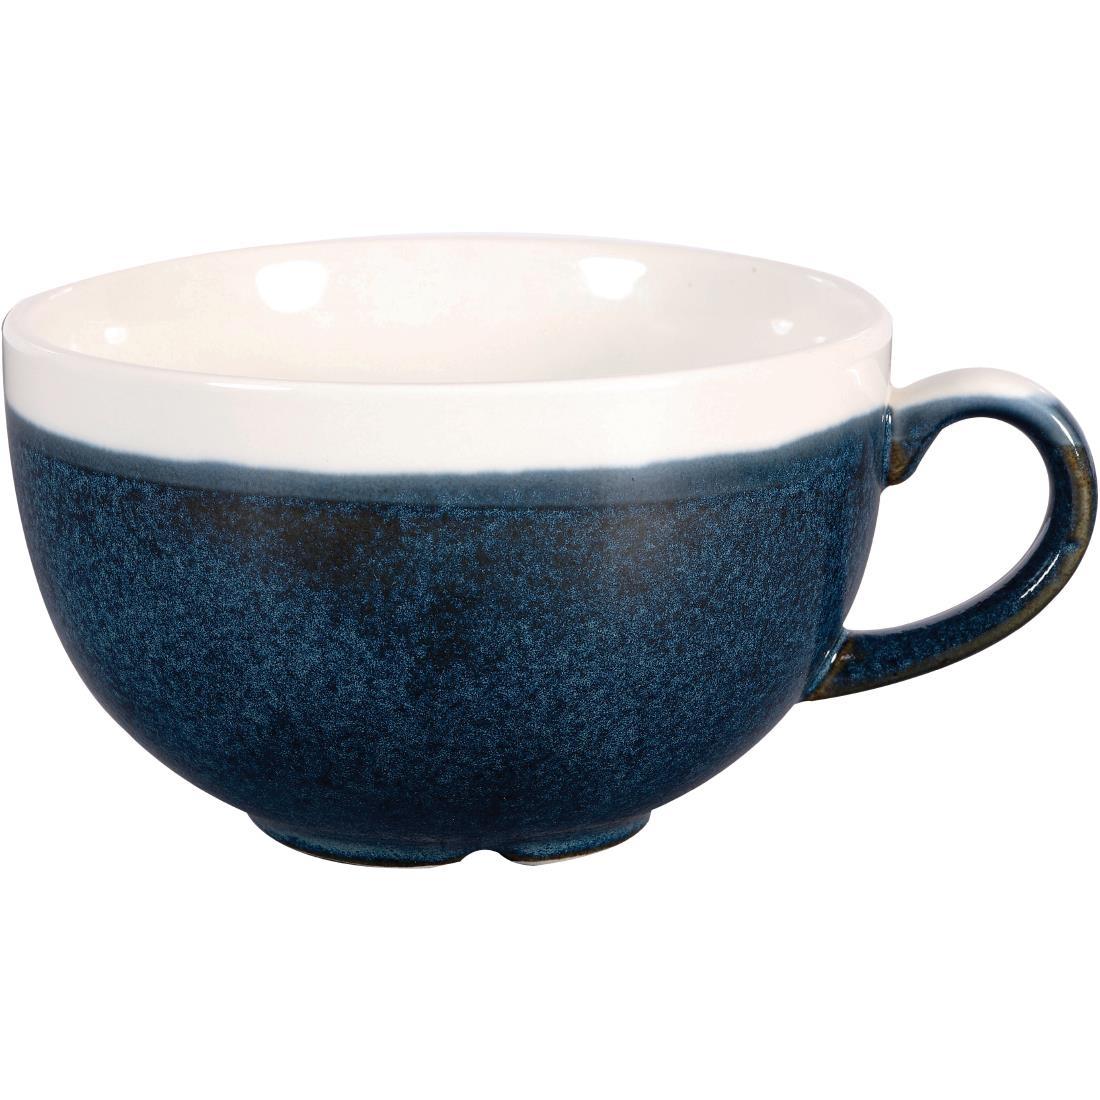 Churchill Monochrome Cappuccino Cup Sapphire Blue 340ml (Pack of 12) - DR670  - 1